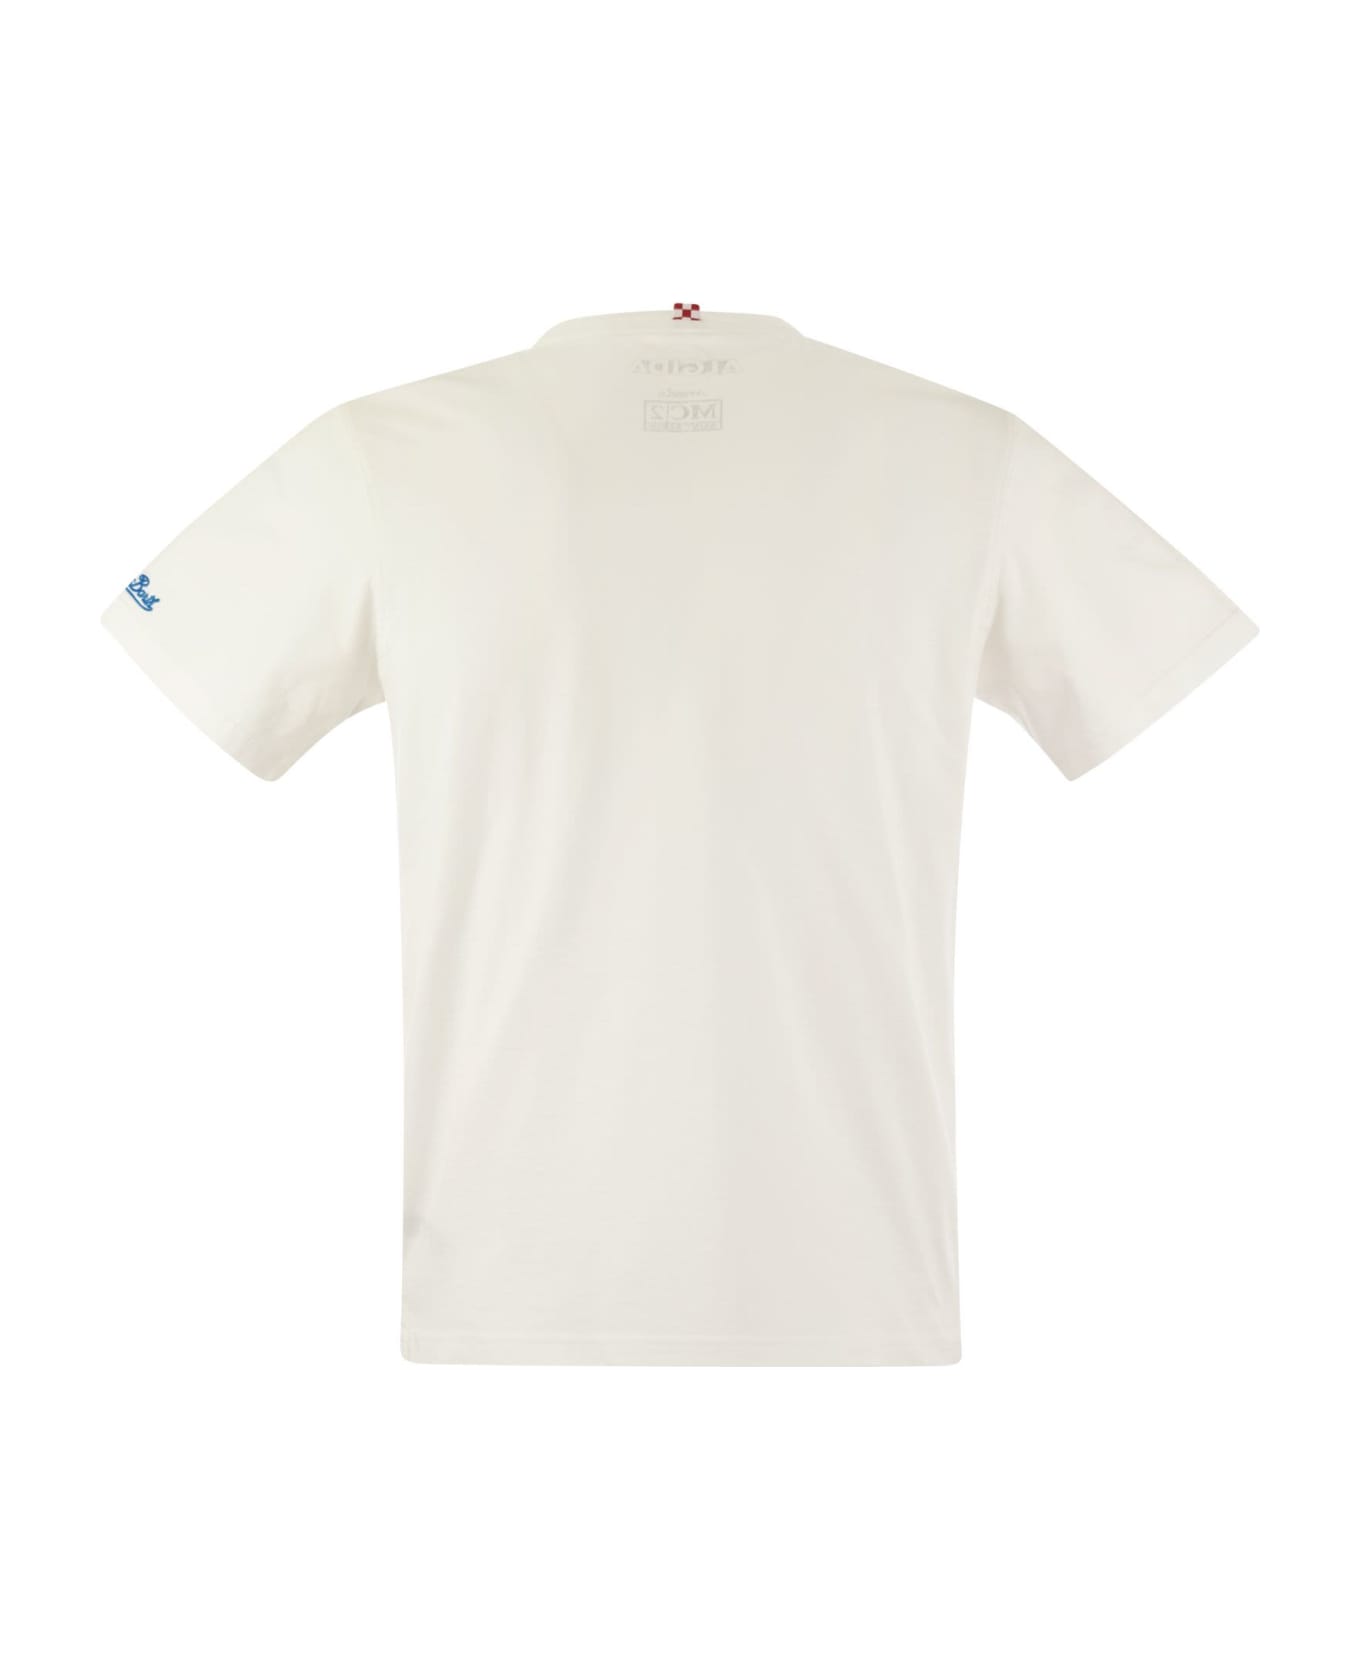 MC2 Saint Barth Austin - T-shirt With Embroidery On Chest Algida Limited Edition - White シャツ